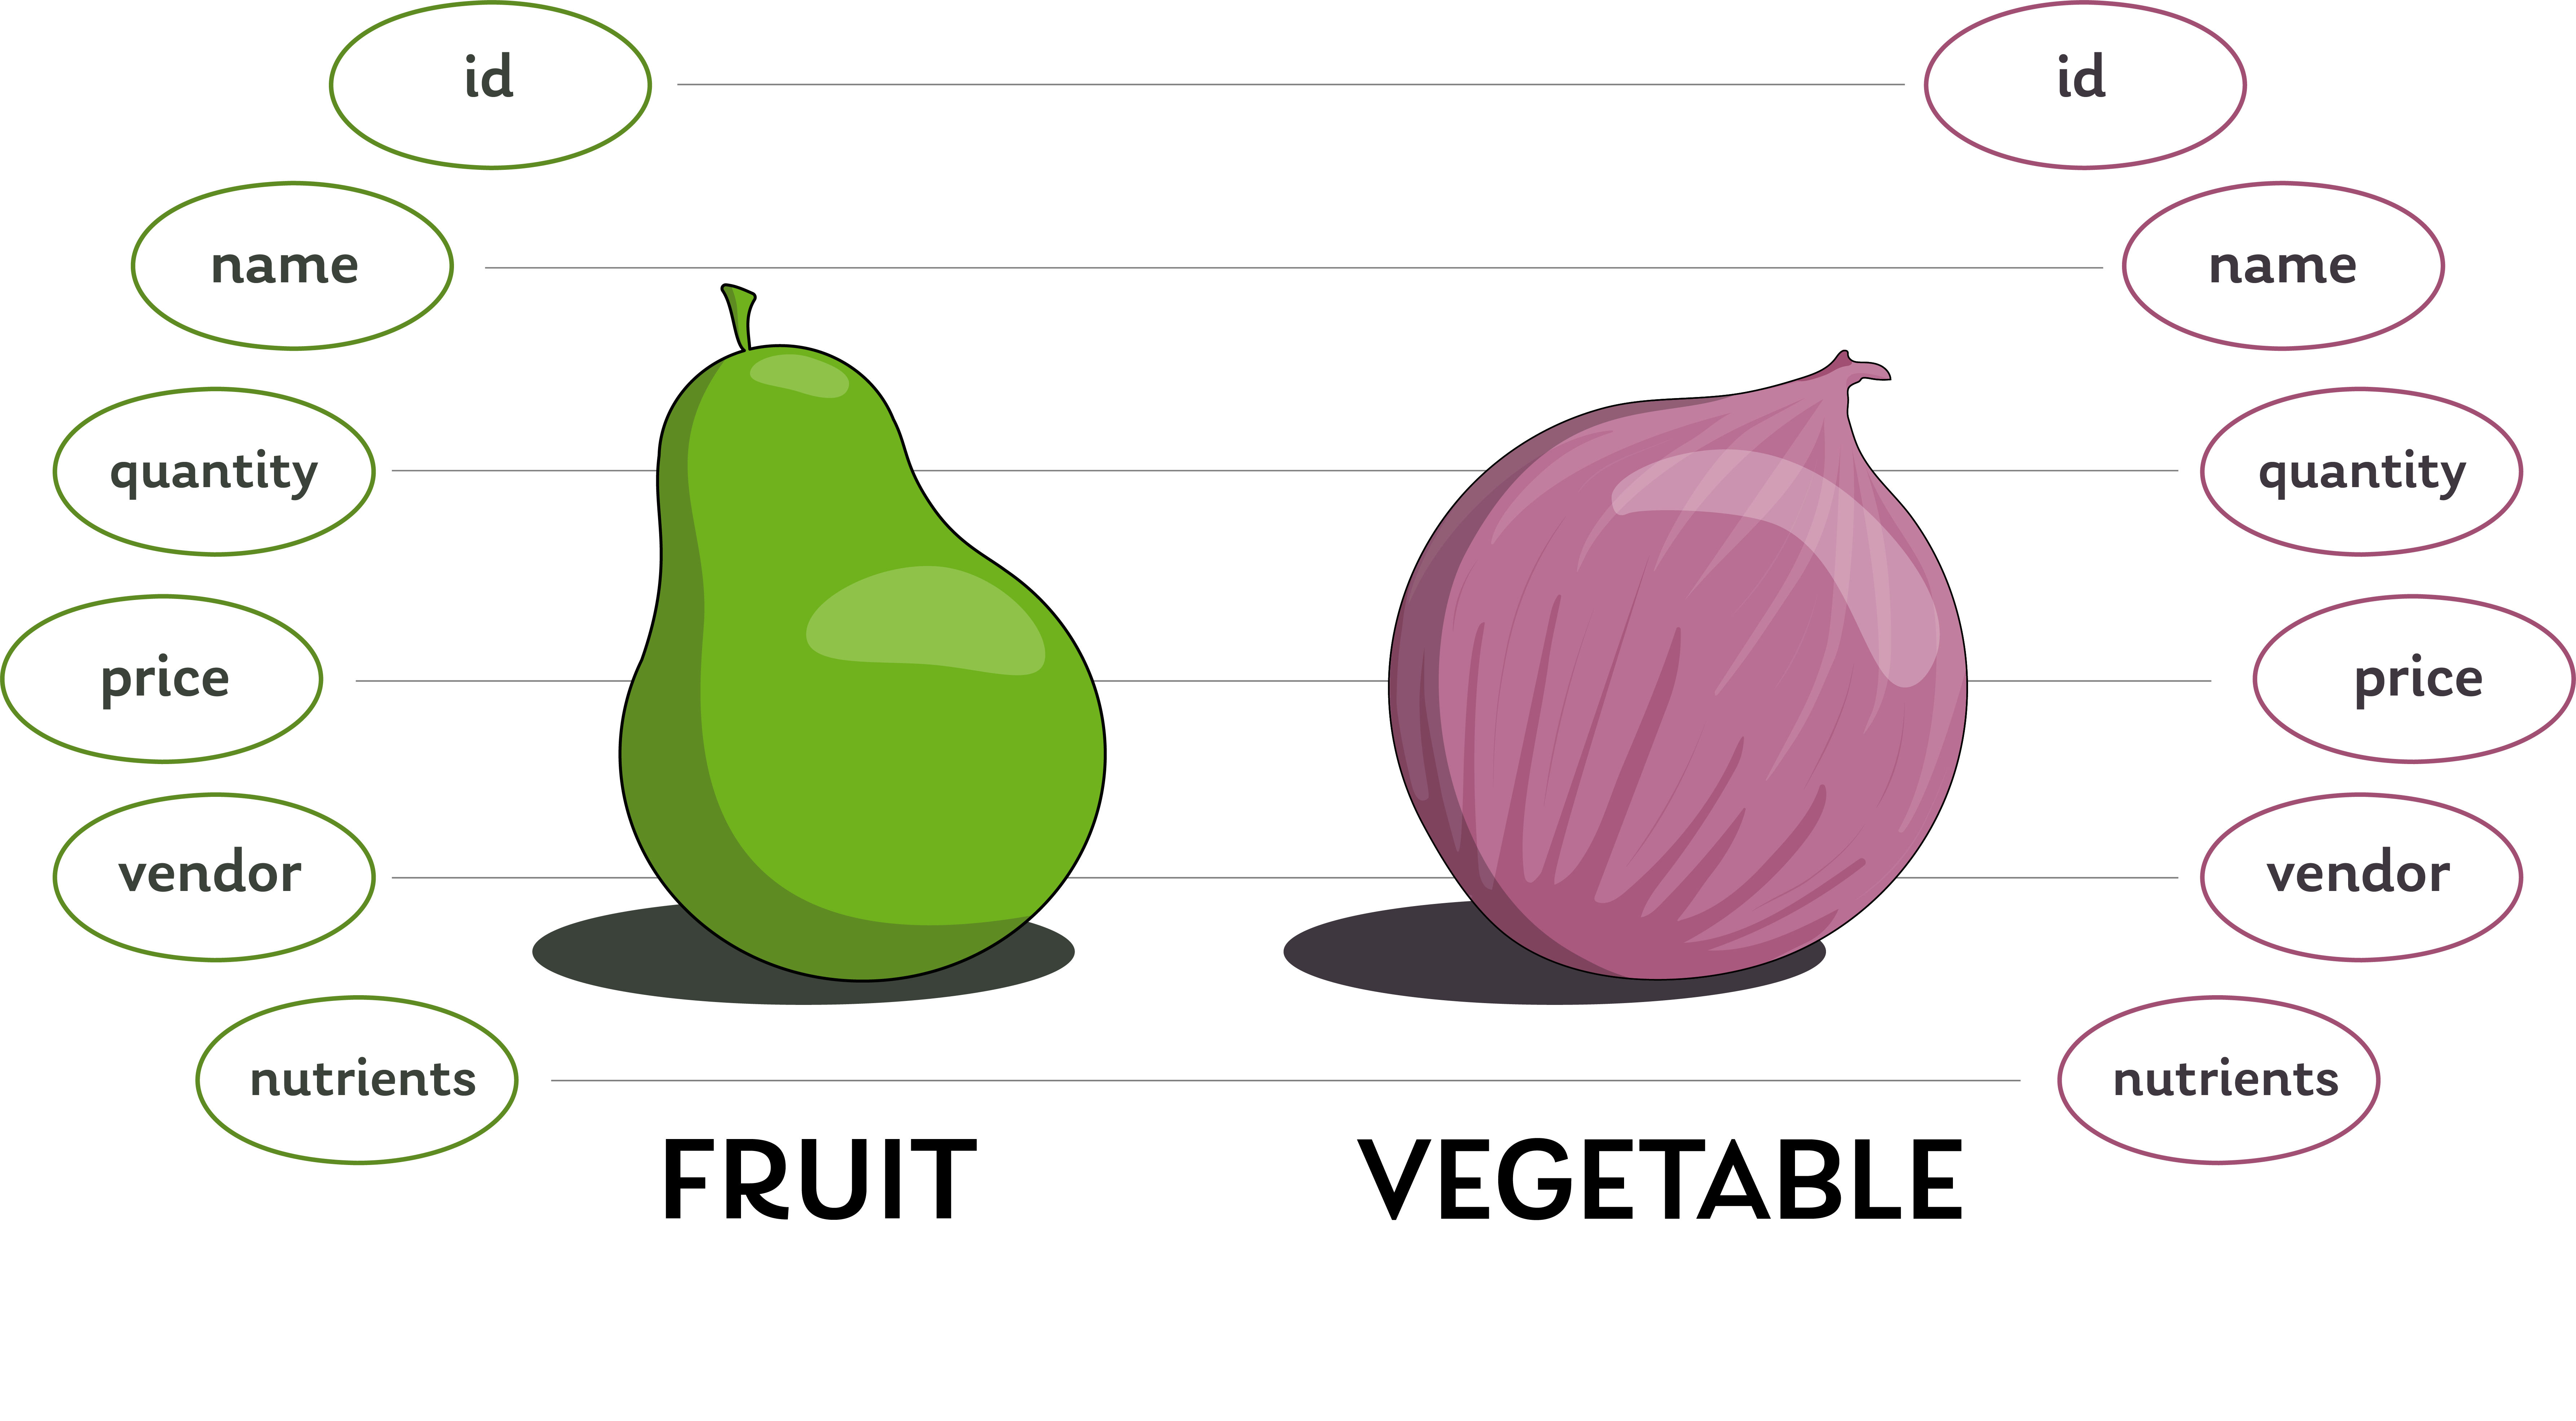 A pear represents the Fruit type, and an onion represents the Vegetable type, but they have six fields (such as id, name, quantity, price) in common.